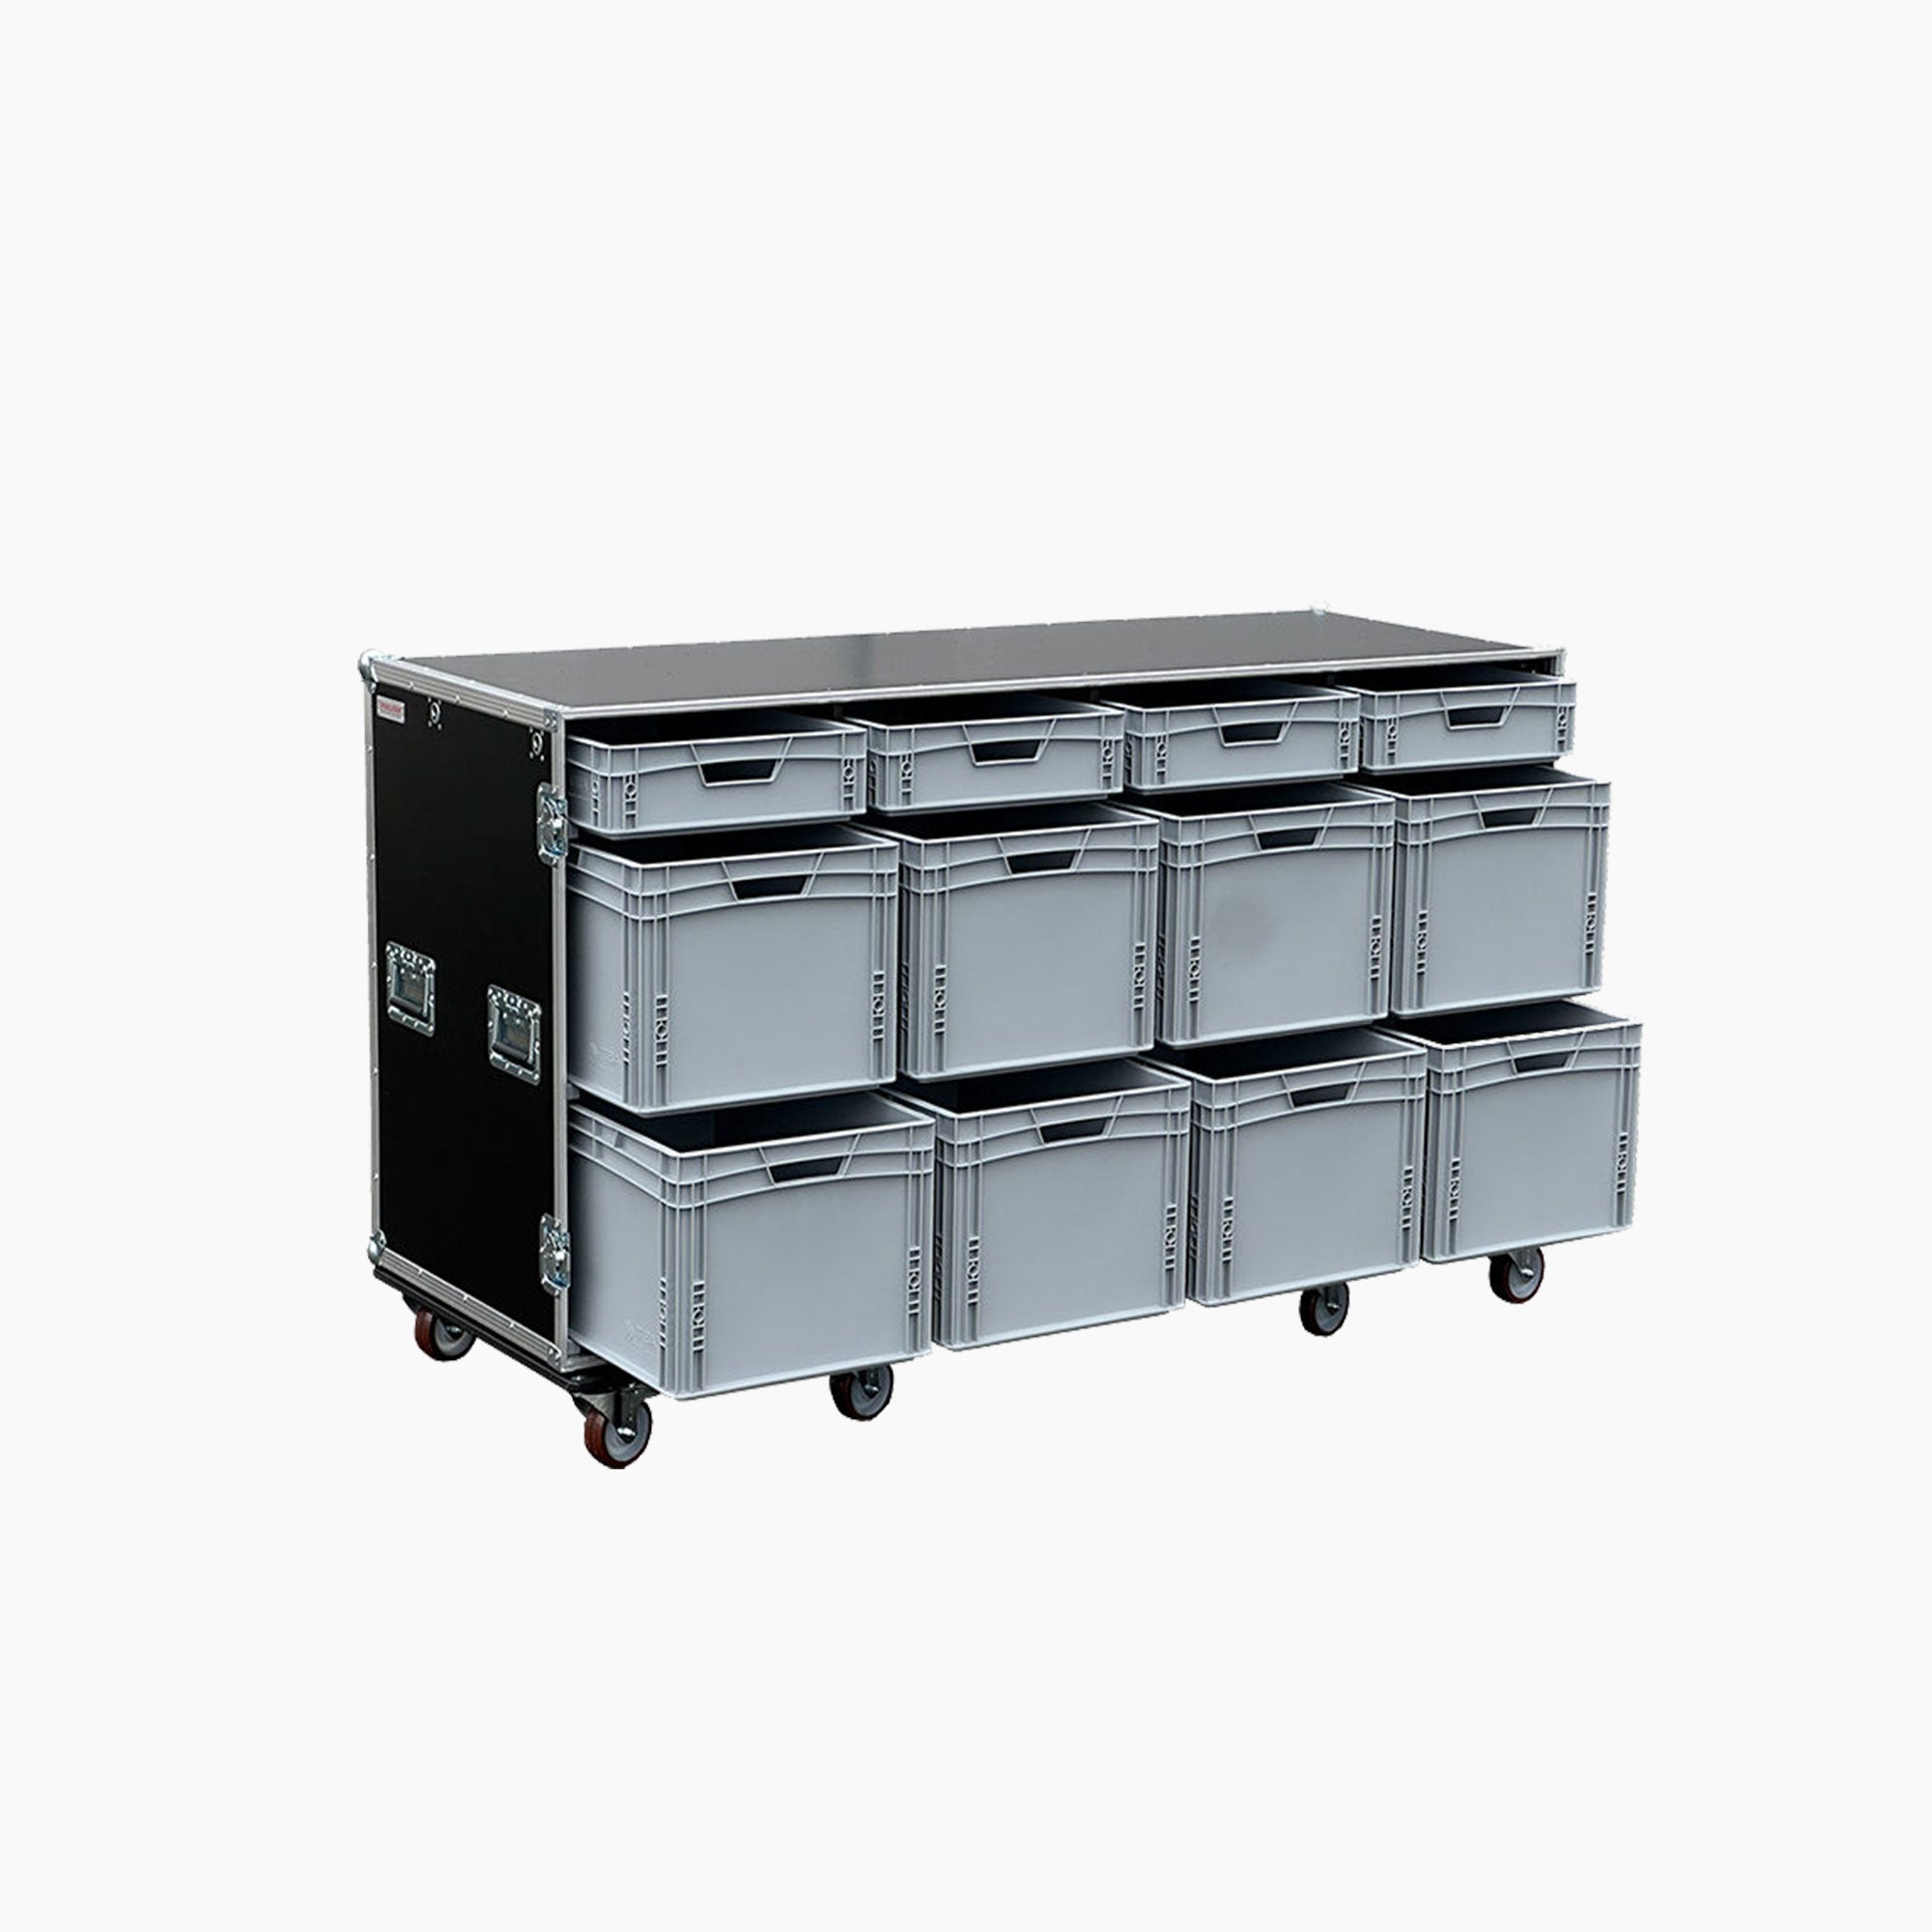 Caseliner | Toolbox UNI B4-Toolbox Case-Caseliner-gpx-store